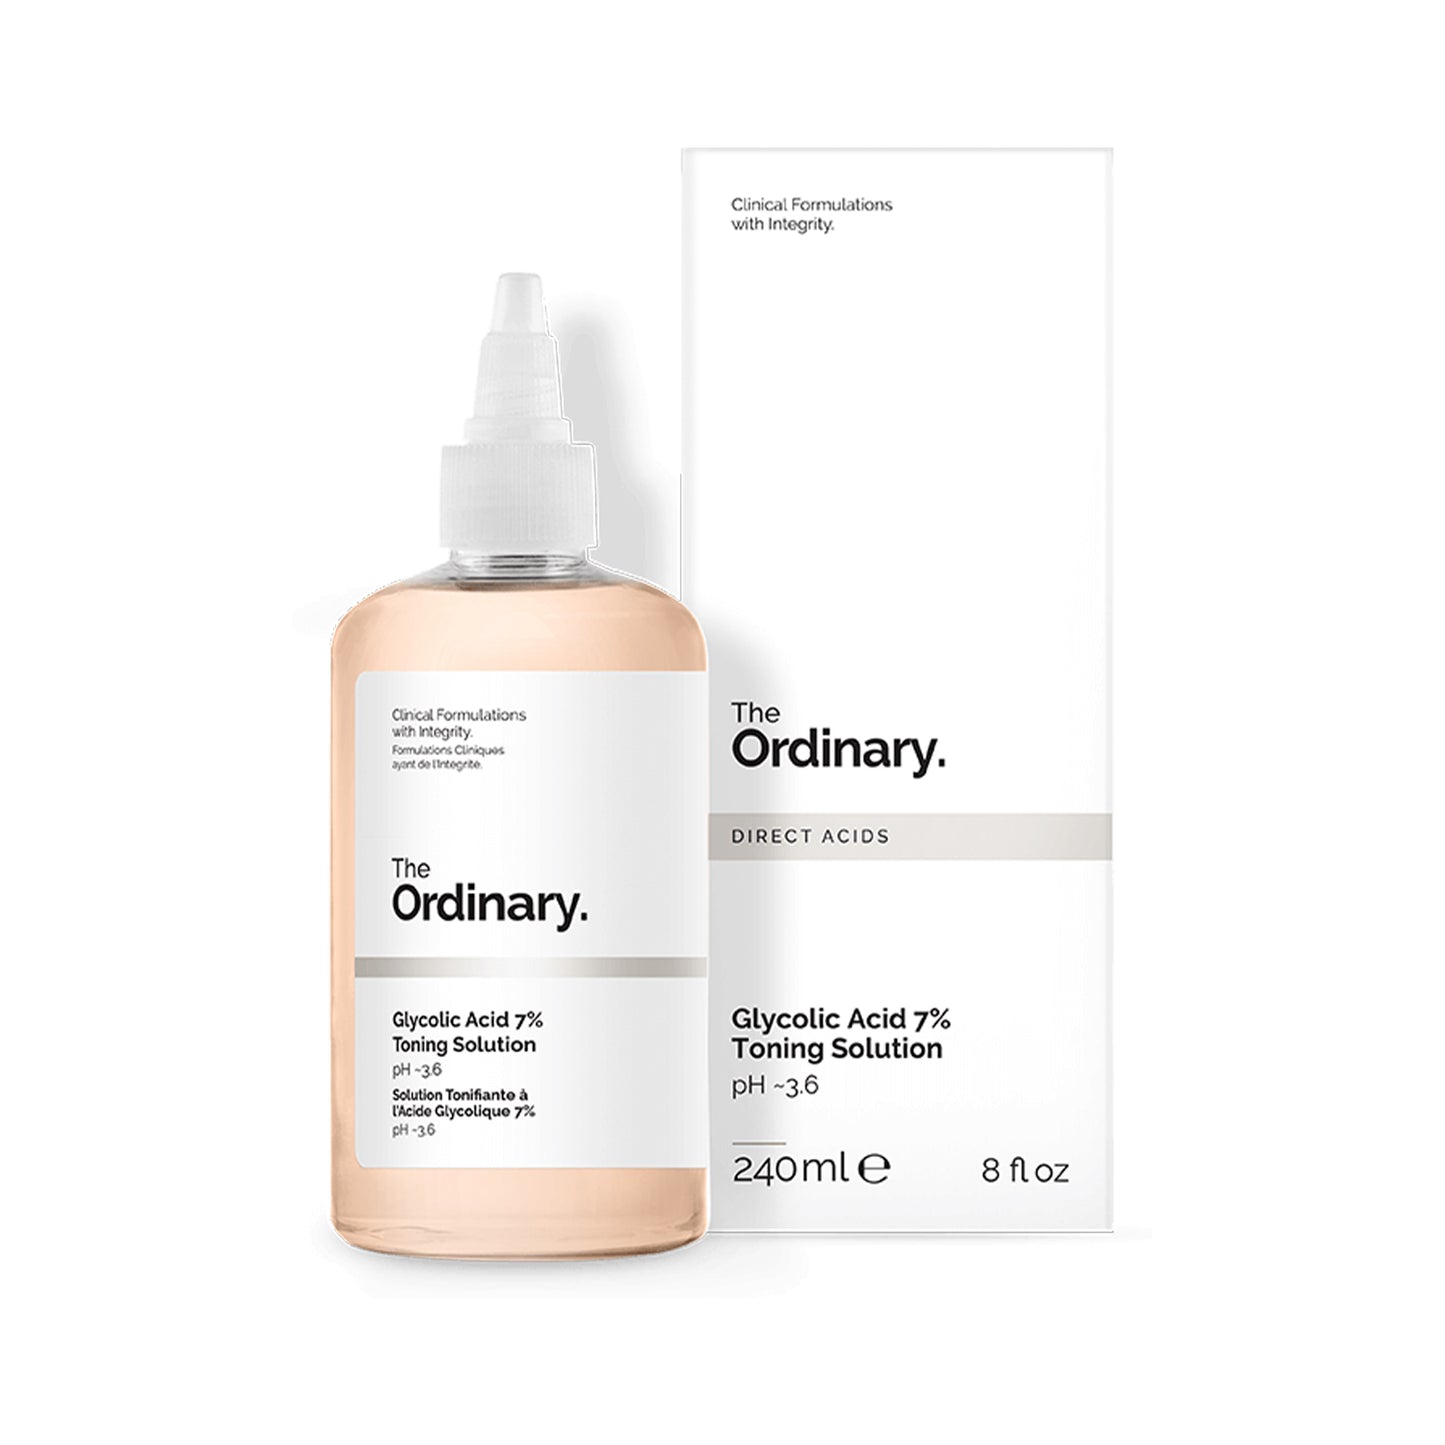 The Ordinary Glycolic Acid 7% Toning Solution. Cash on delivery in karachi, lahore, islamabad, quetta, pakistan.